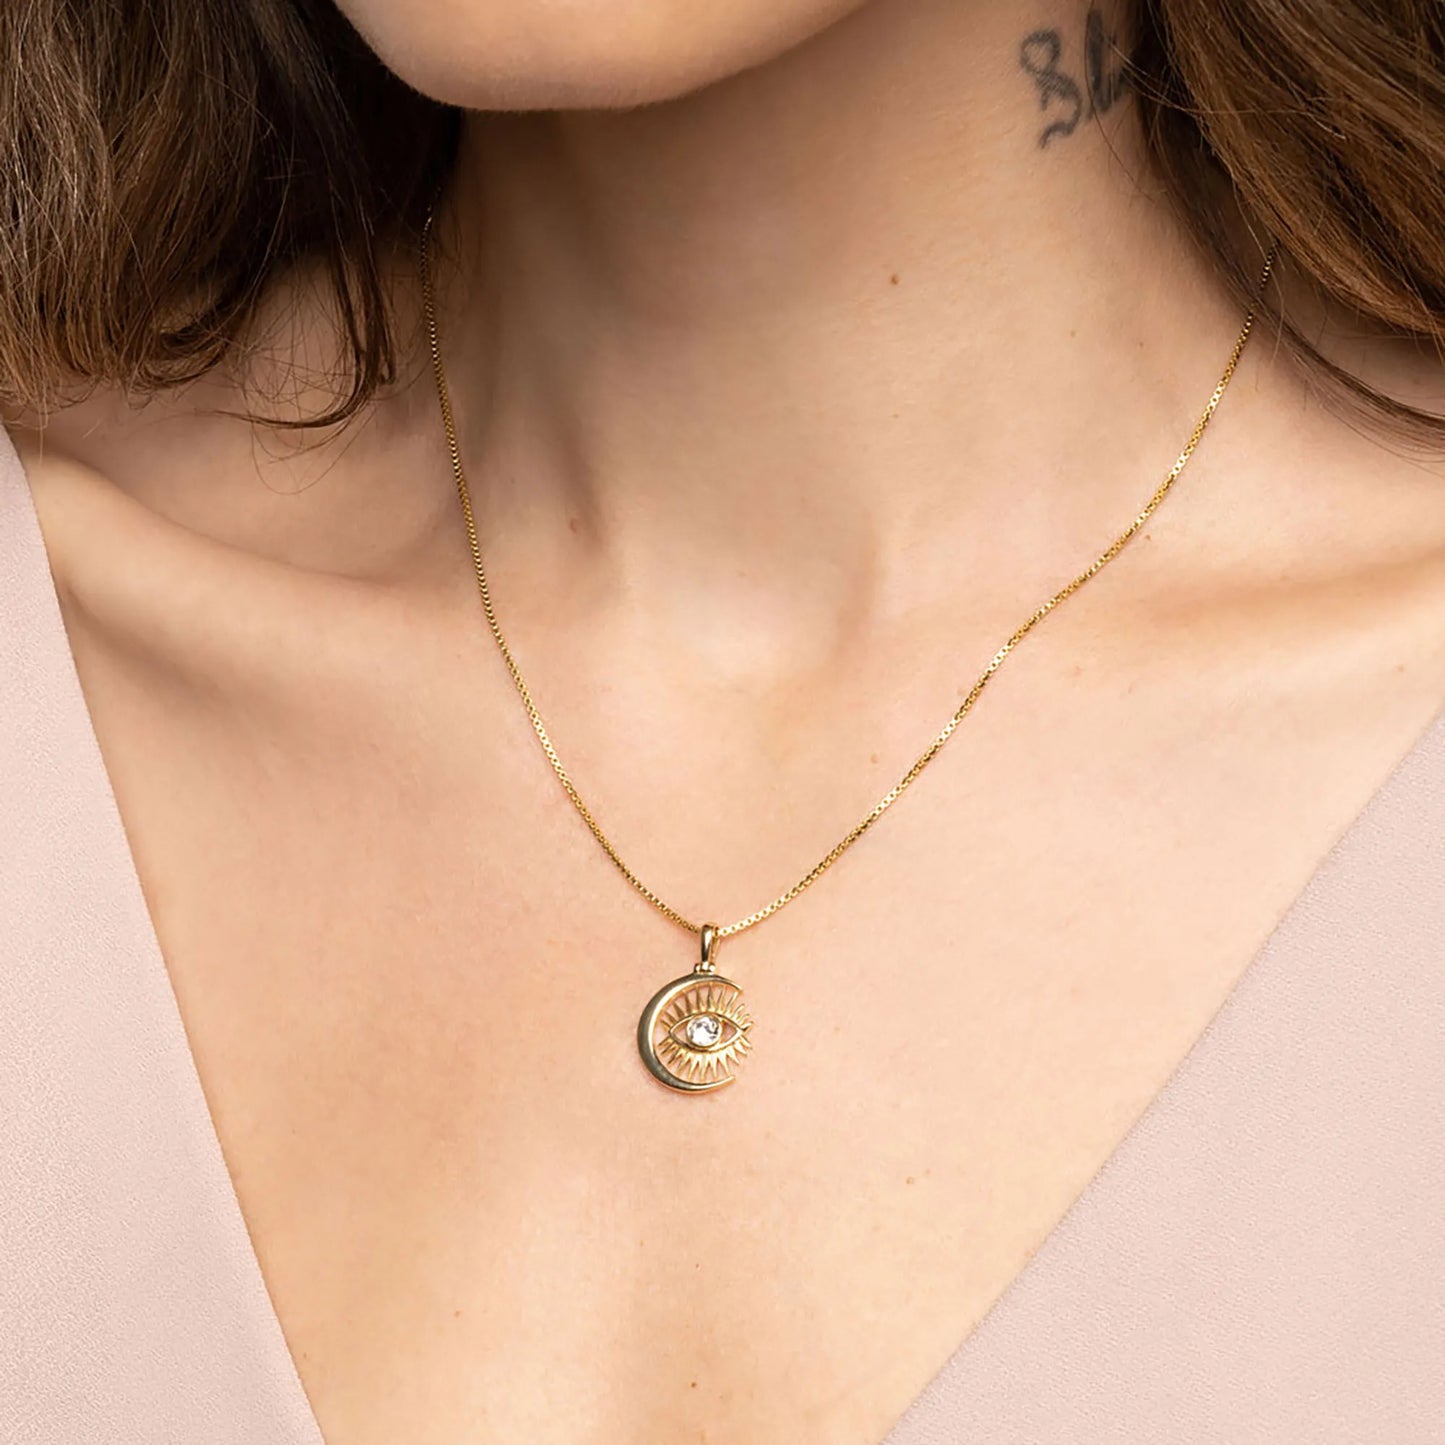 Watchful Moon Eye Necklace by Awe Inspired